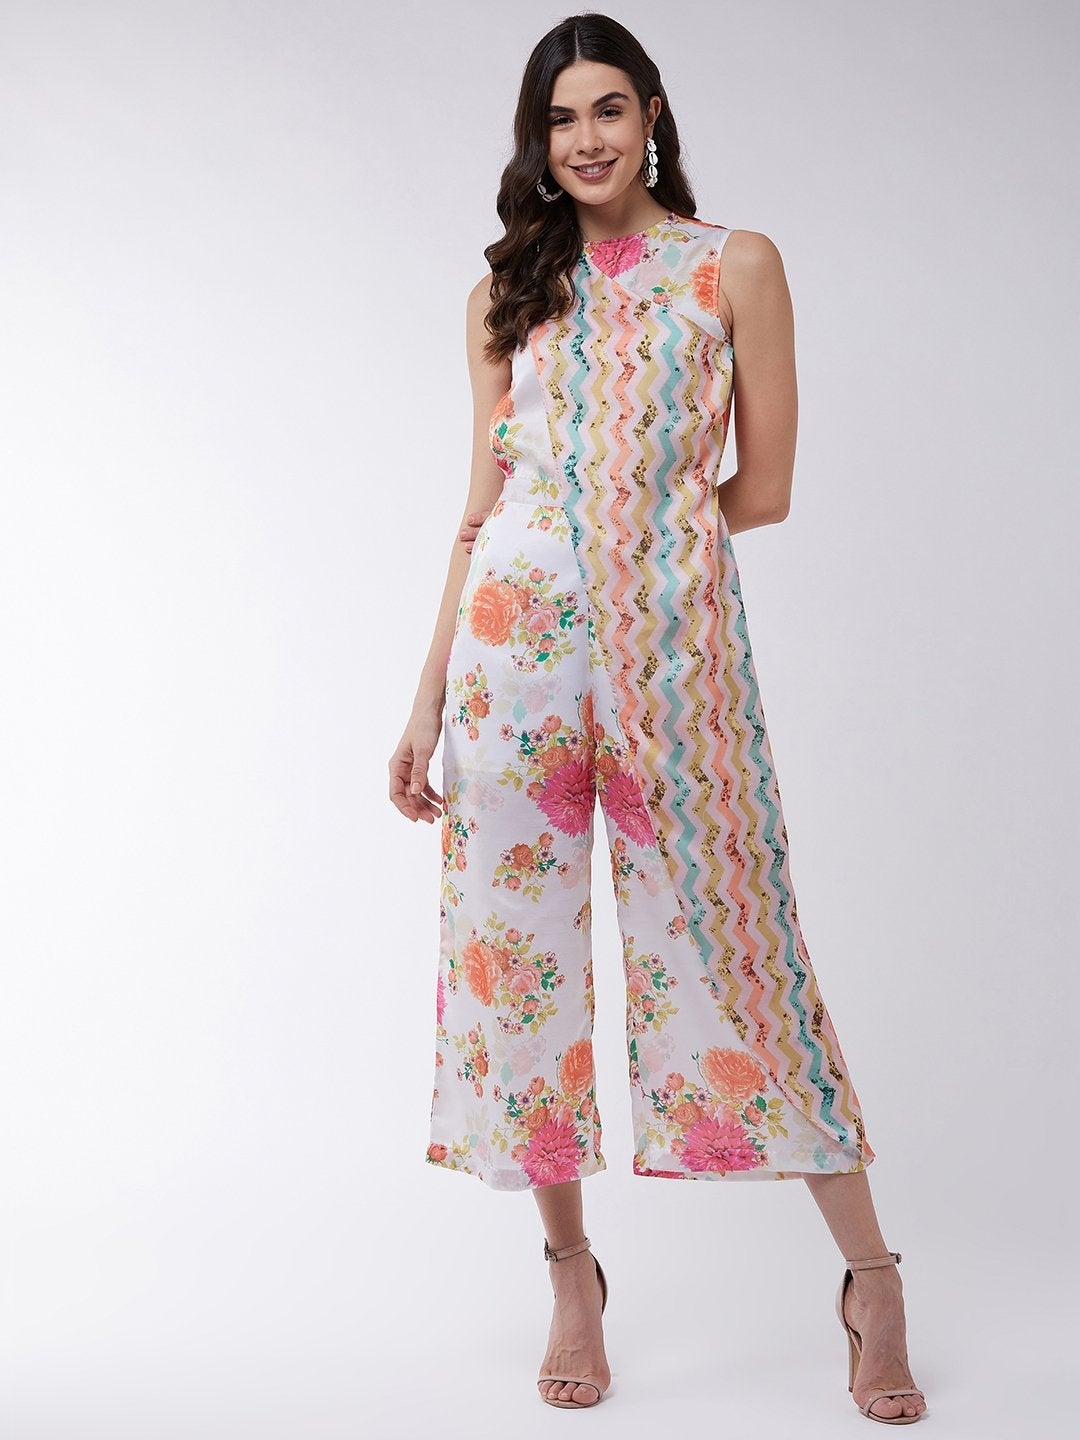 Women's Candy Inspired Digital Printed Wrapped Jumpsuit - Pannkh